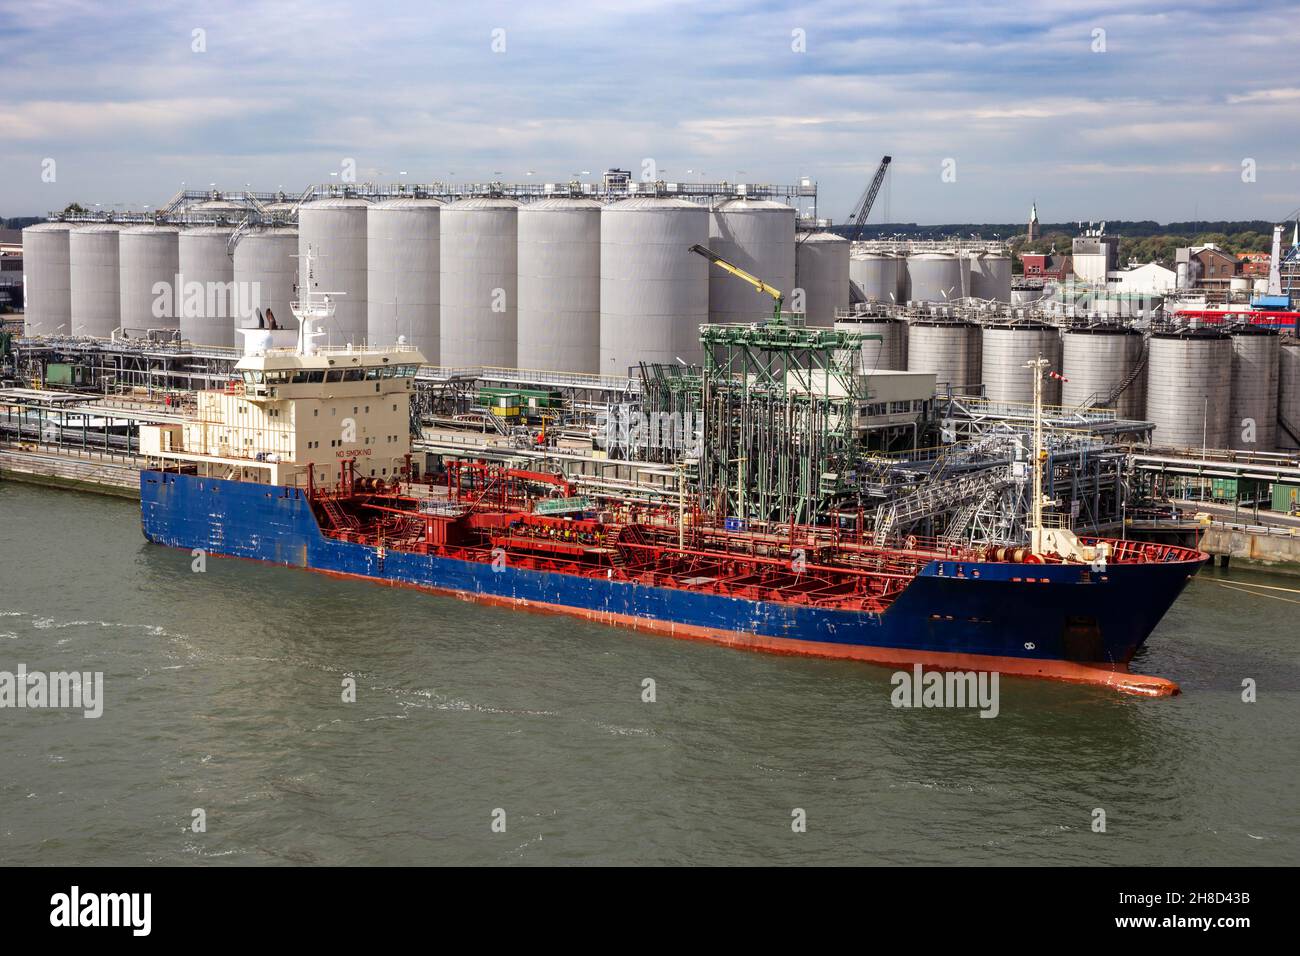 Oil tanker moored an oil terminal with fuel storage silos in an industrial port Stock Photo